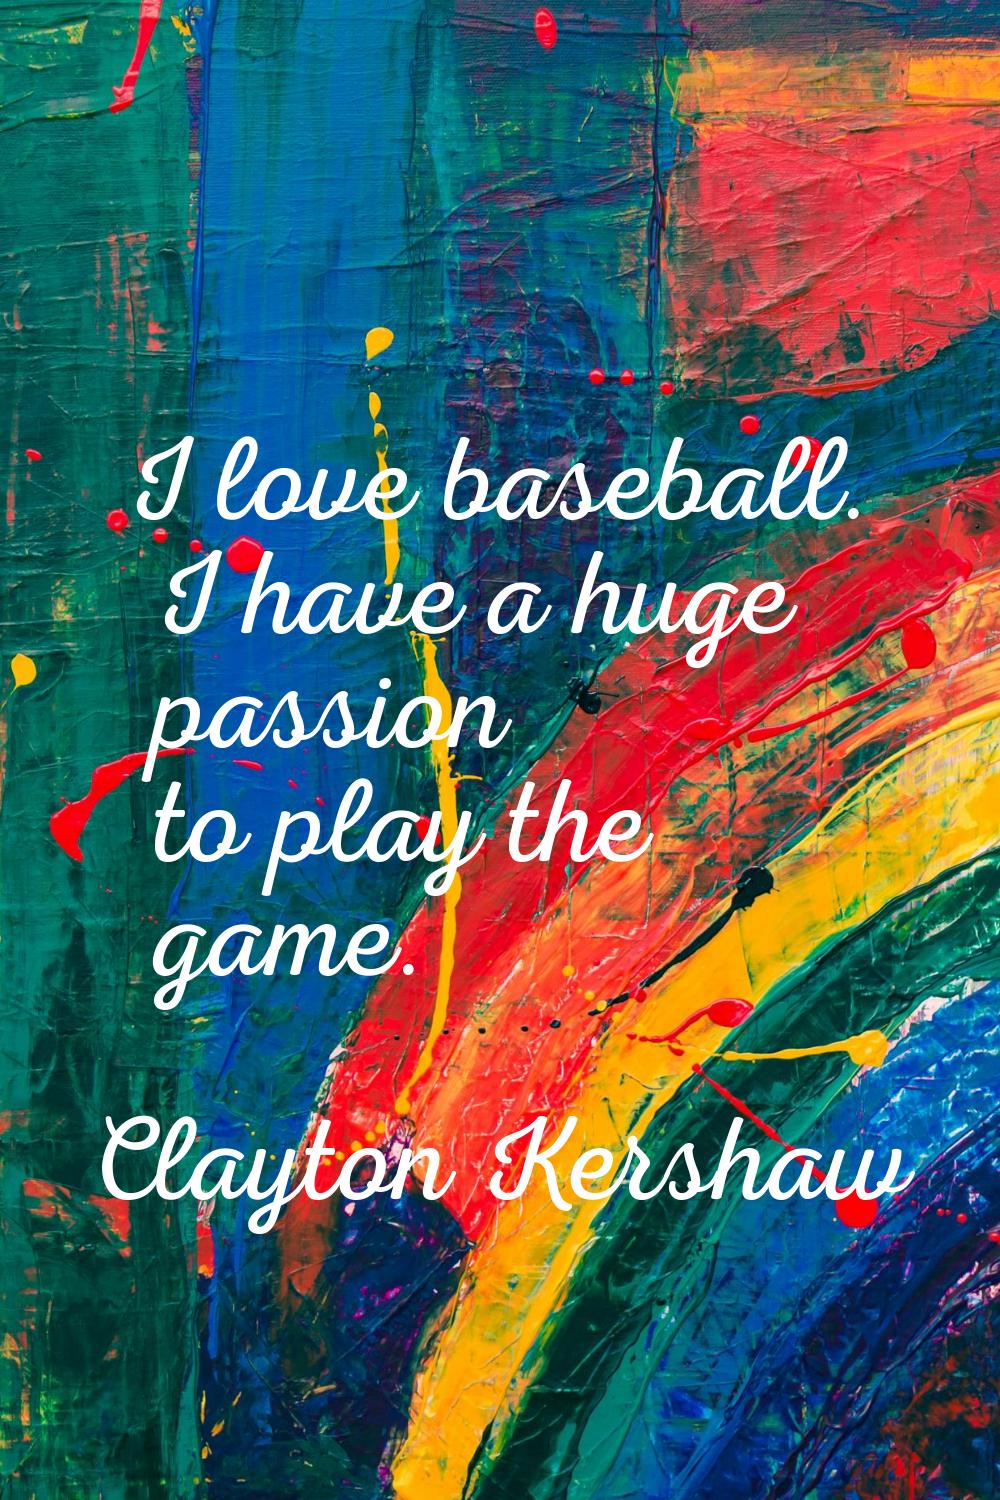 I love baseball. I have a huge passion to play the game.